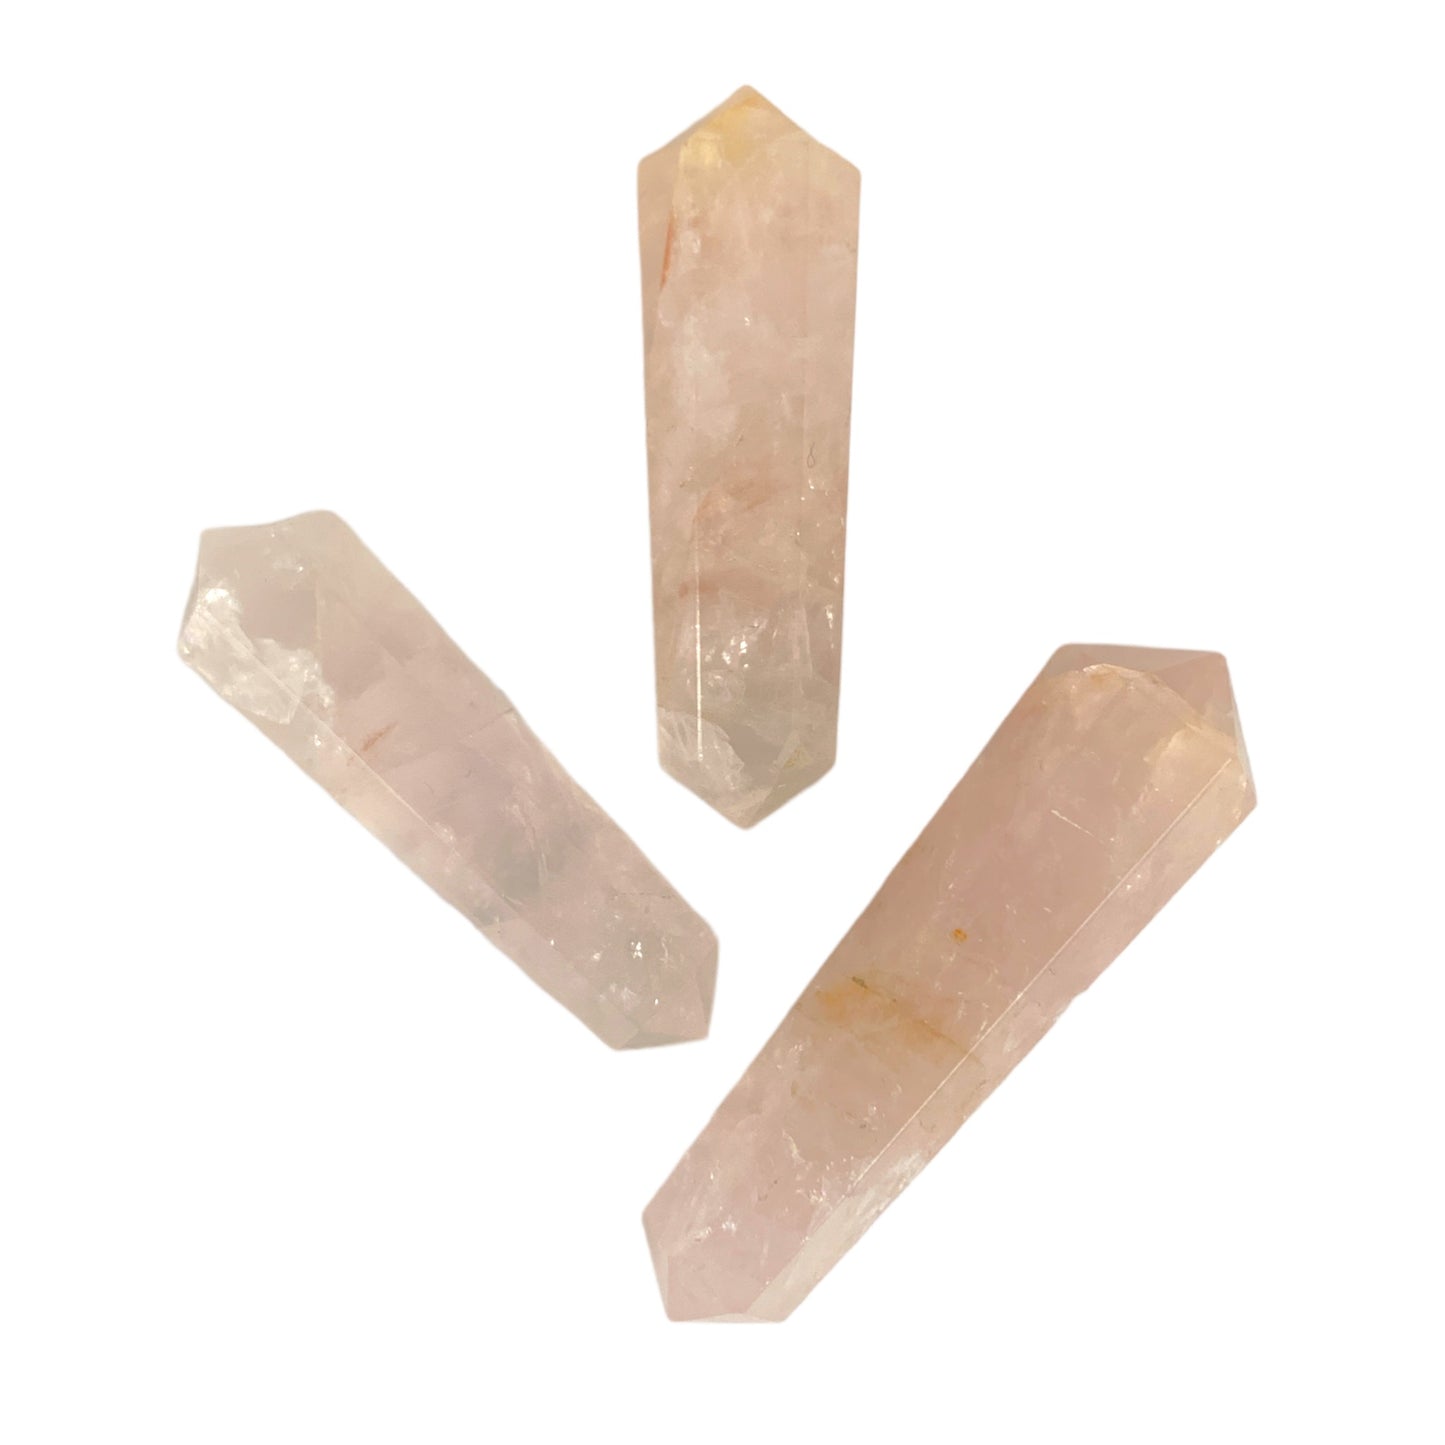 Rose Quartz - 30-40mm - Double Terminated Pencil Points - 10 Grams - India - order in 5's - NEW1021